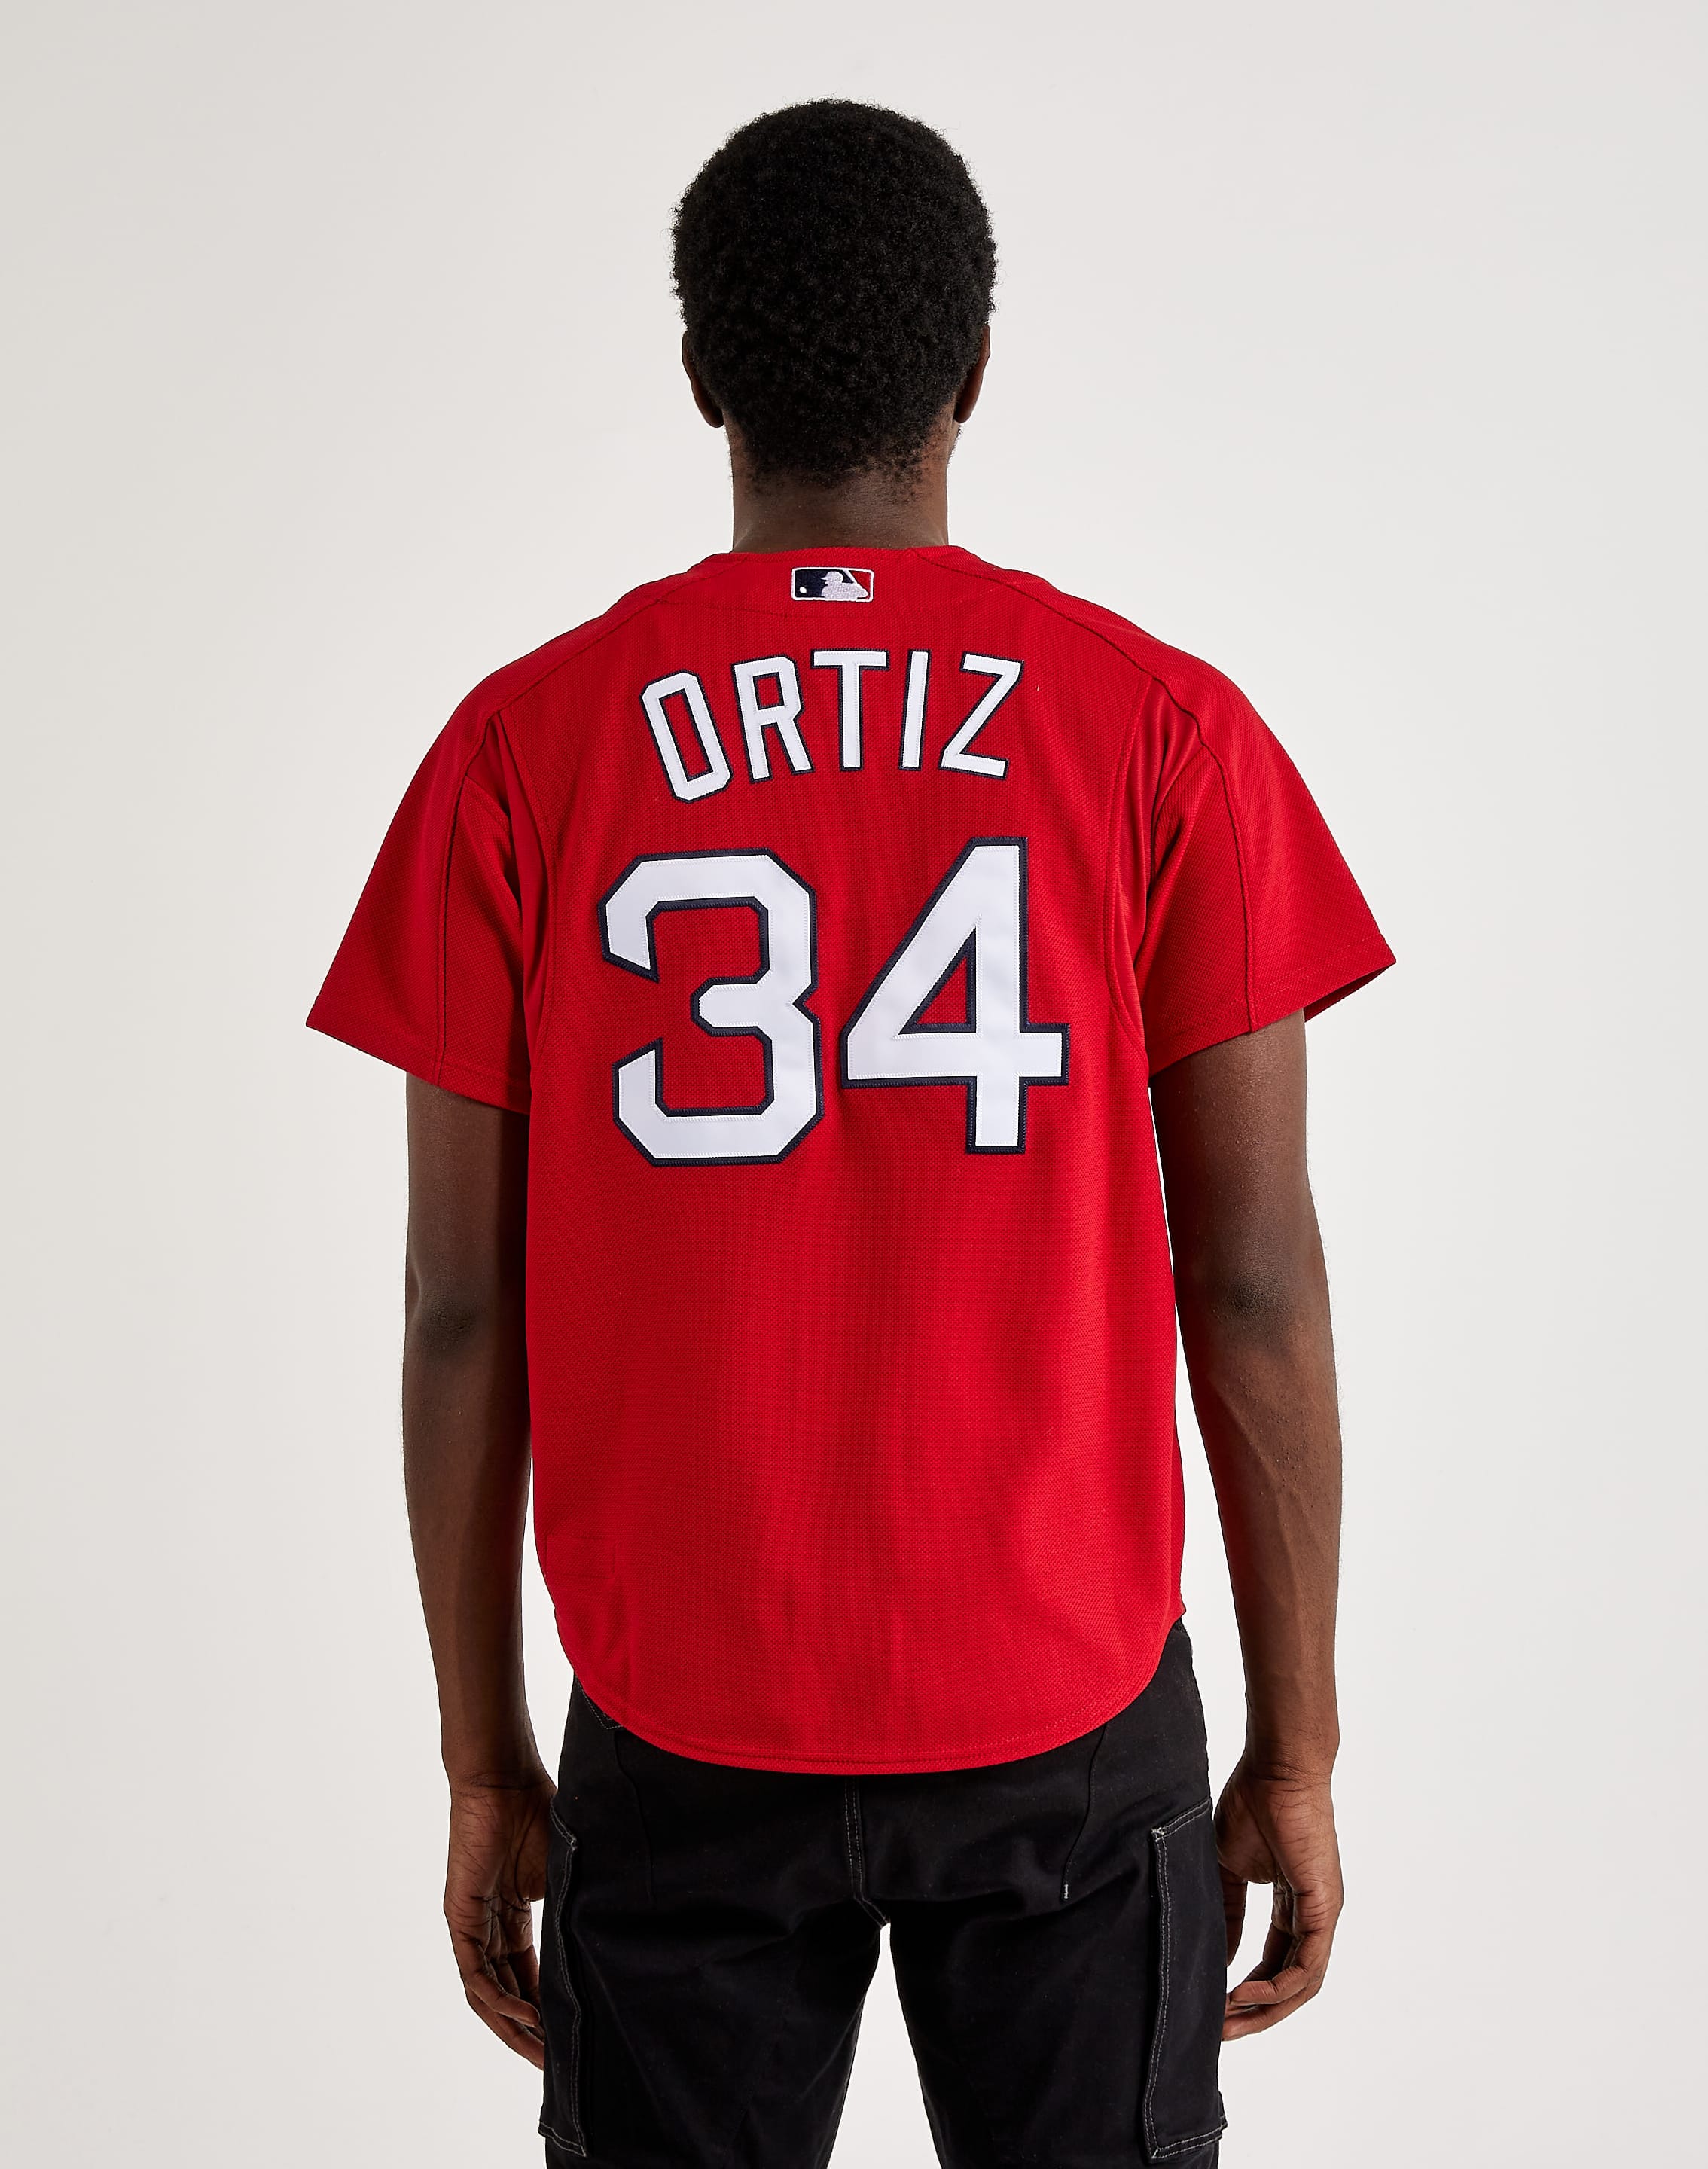 David Ortiz Youth Jersey - Boston Red Sox Youth Home Jersey